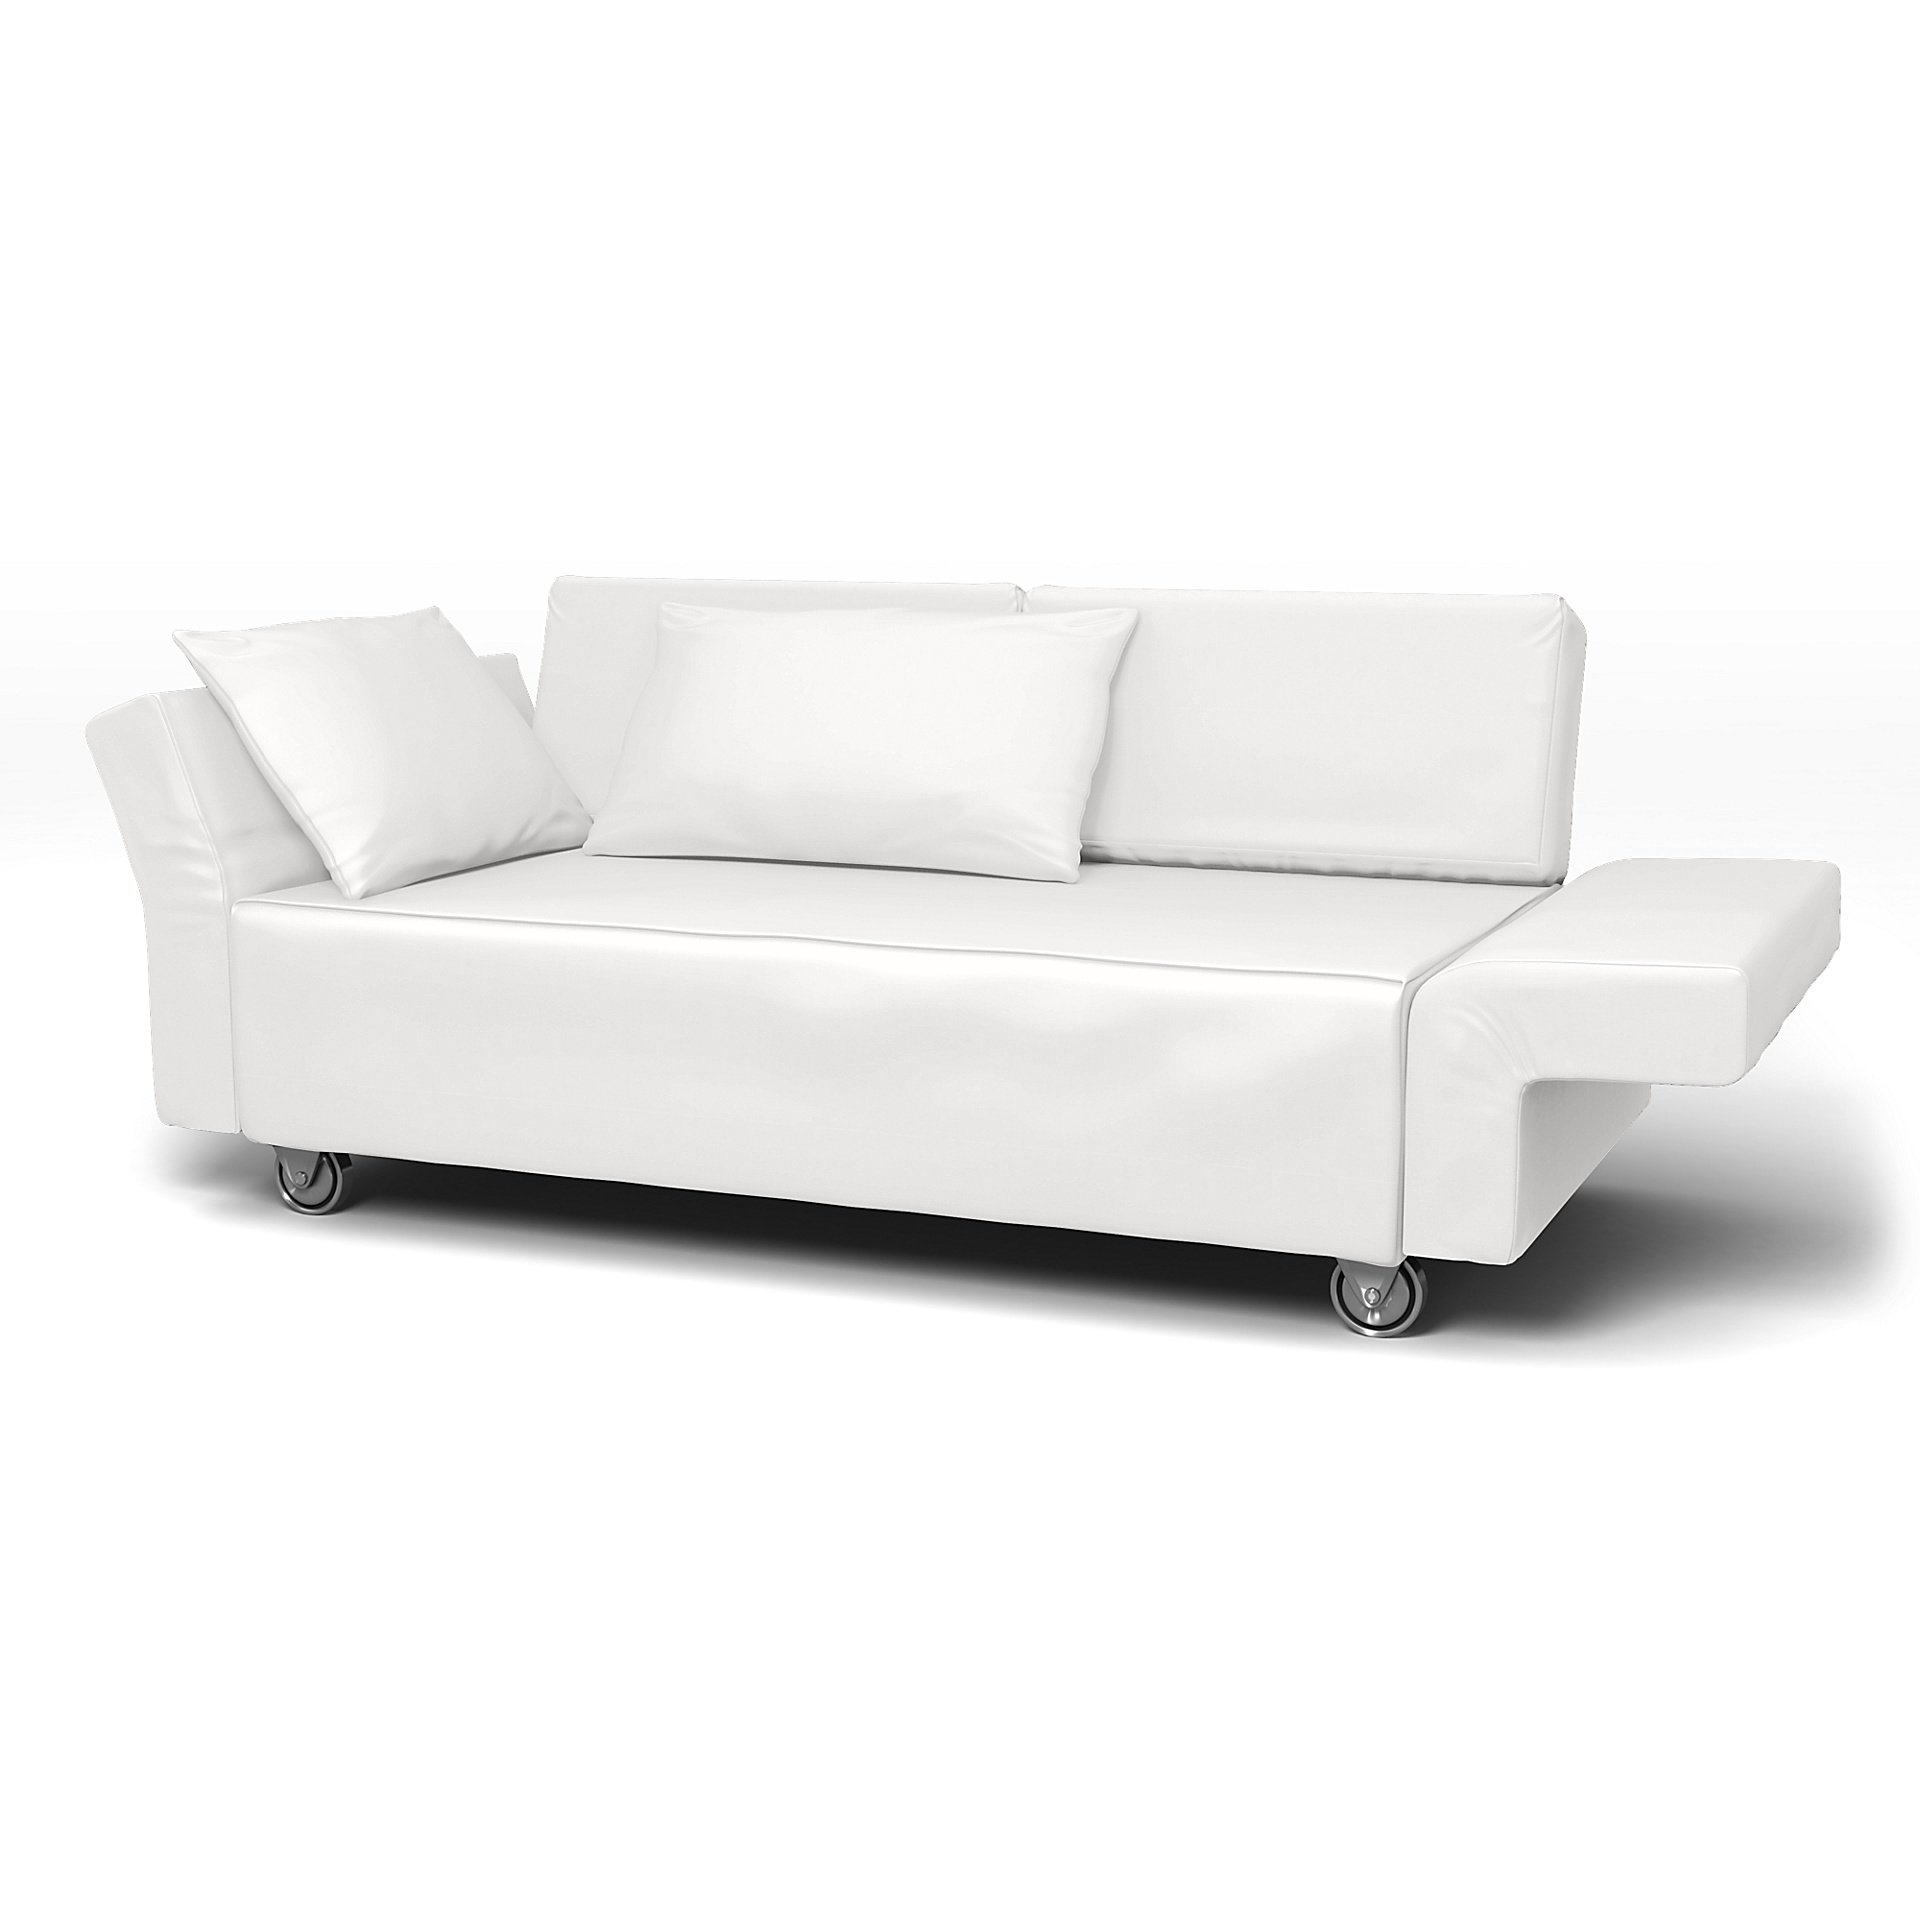 IKEA - Falsterbo 2 Seater Sofa Cover, Absolute White, Cotton - Bemz